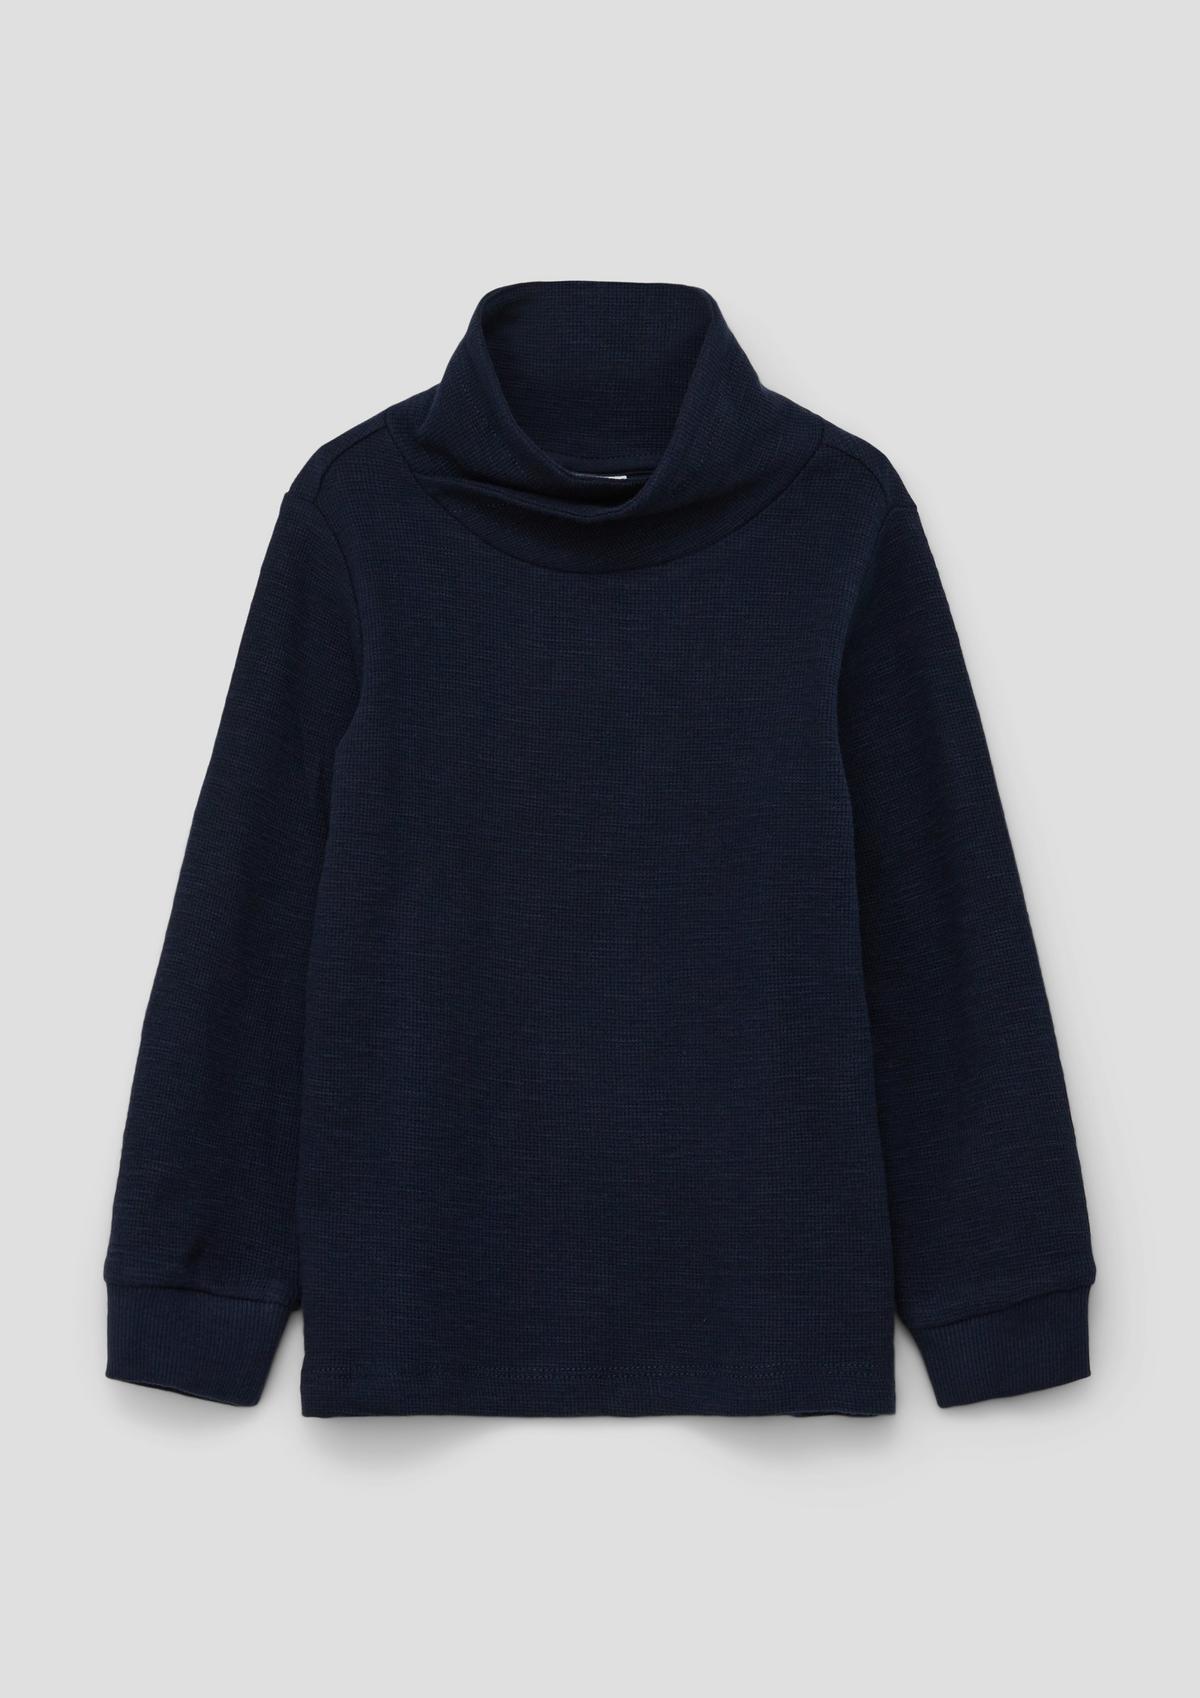 Long sleeve top with collar navy - a shawl